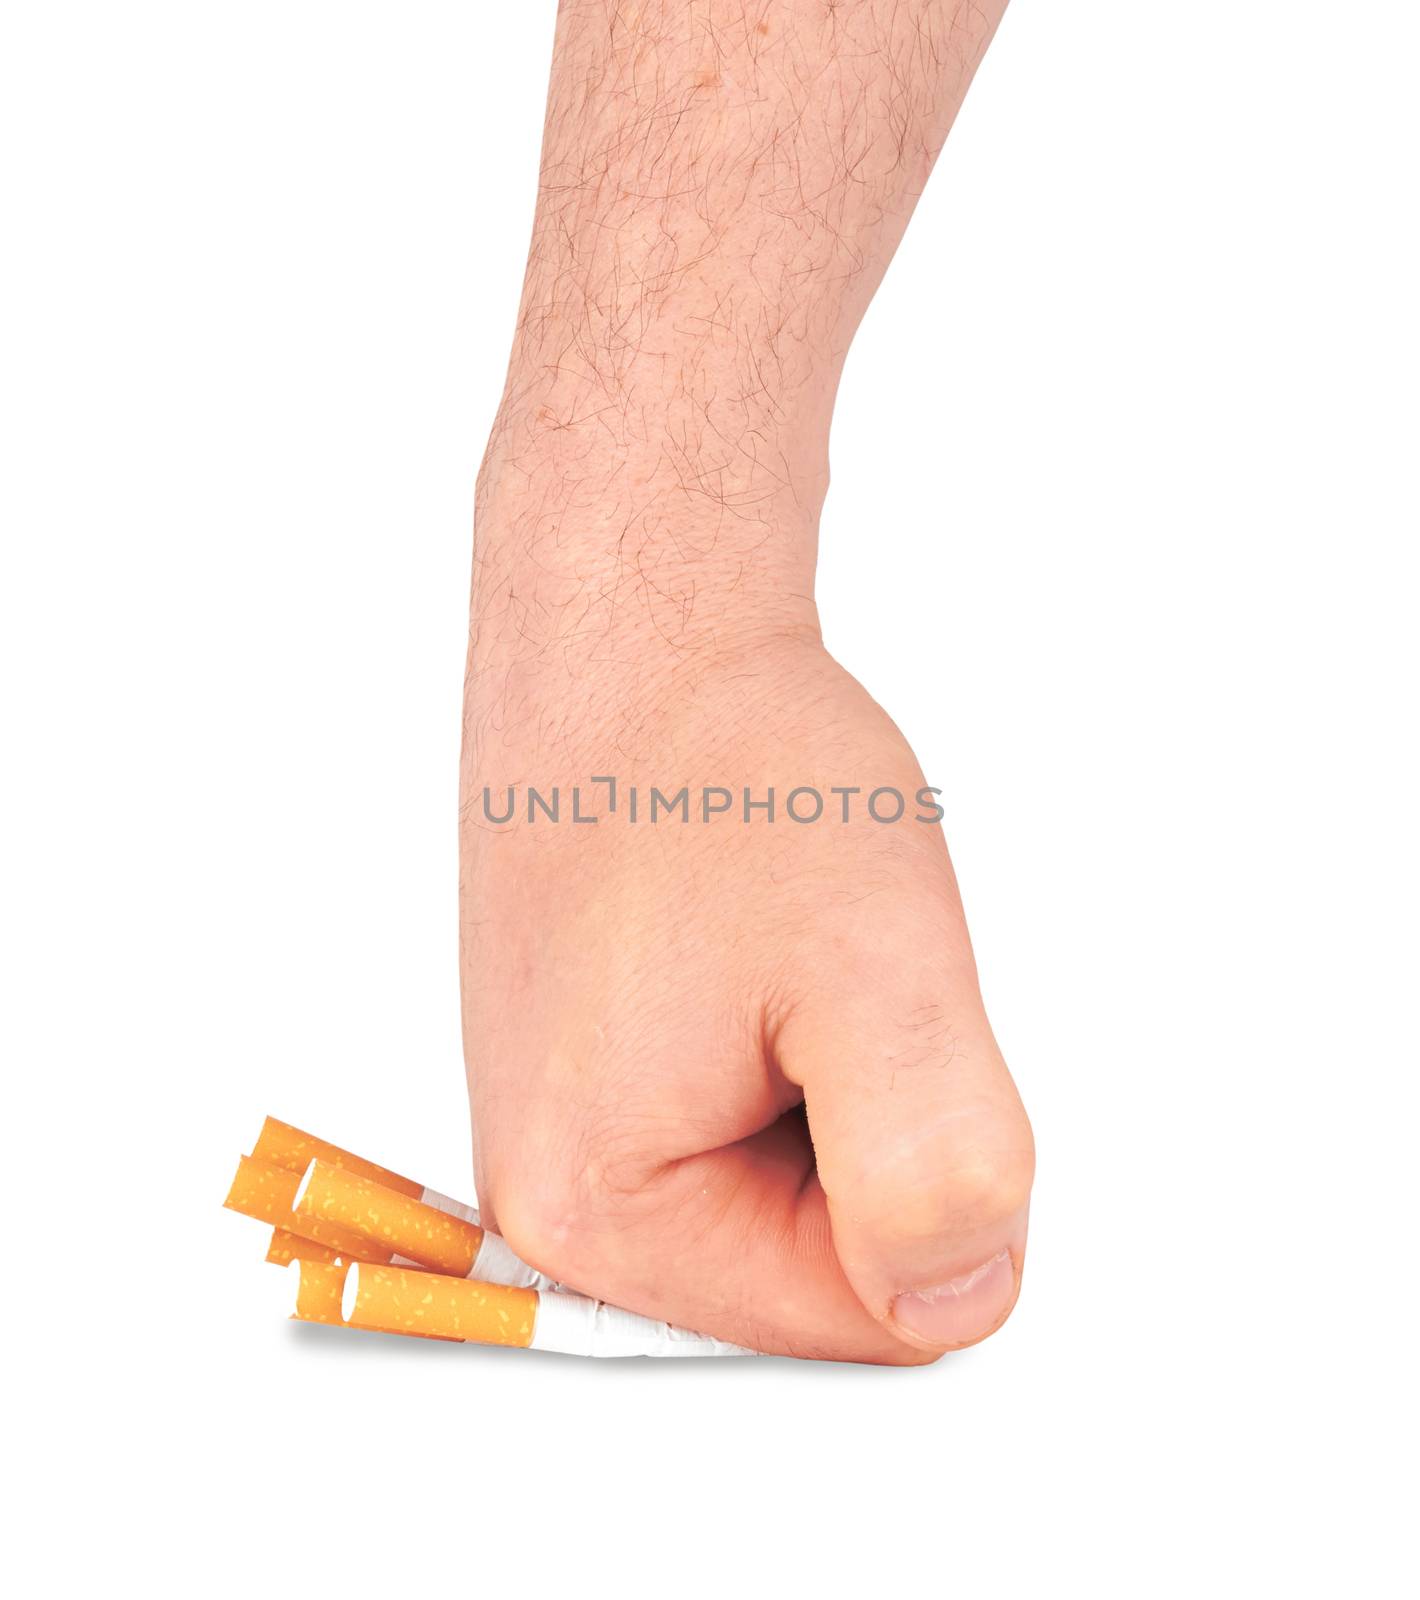 stop smoking fist with crushed cigarettes on white